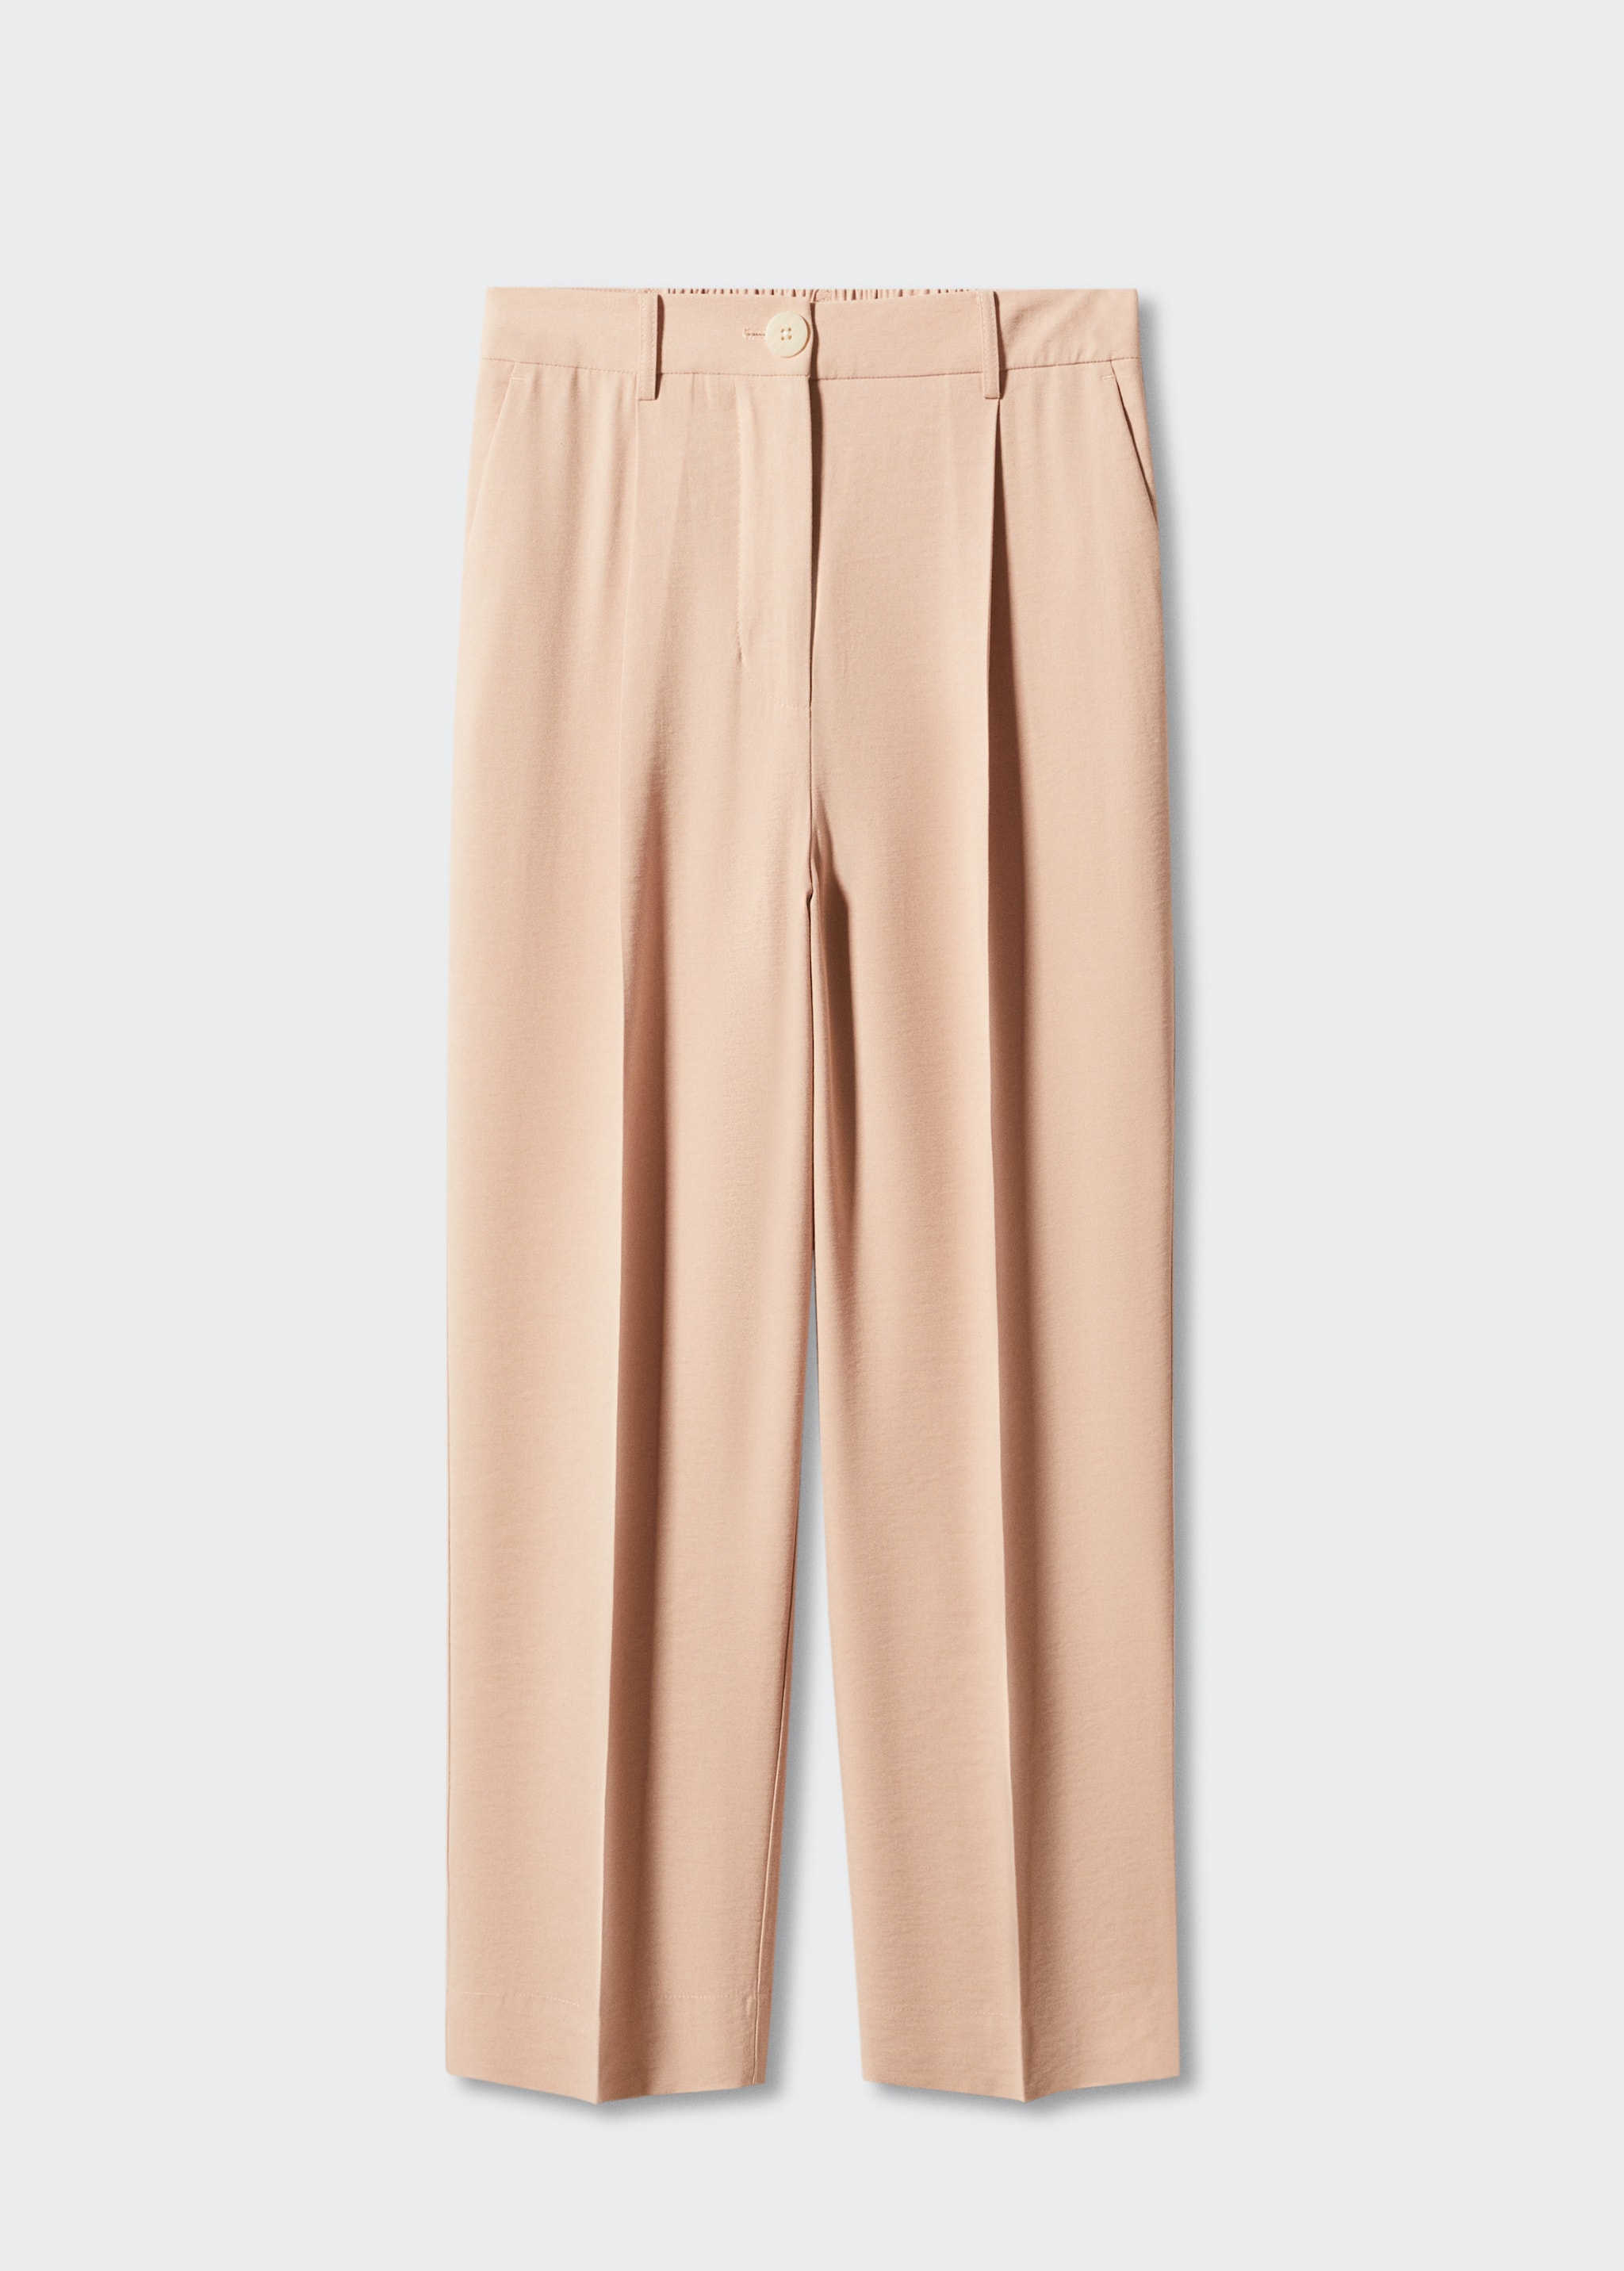 Pleat straight trousers - Article without model